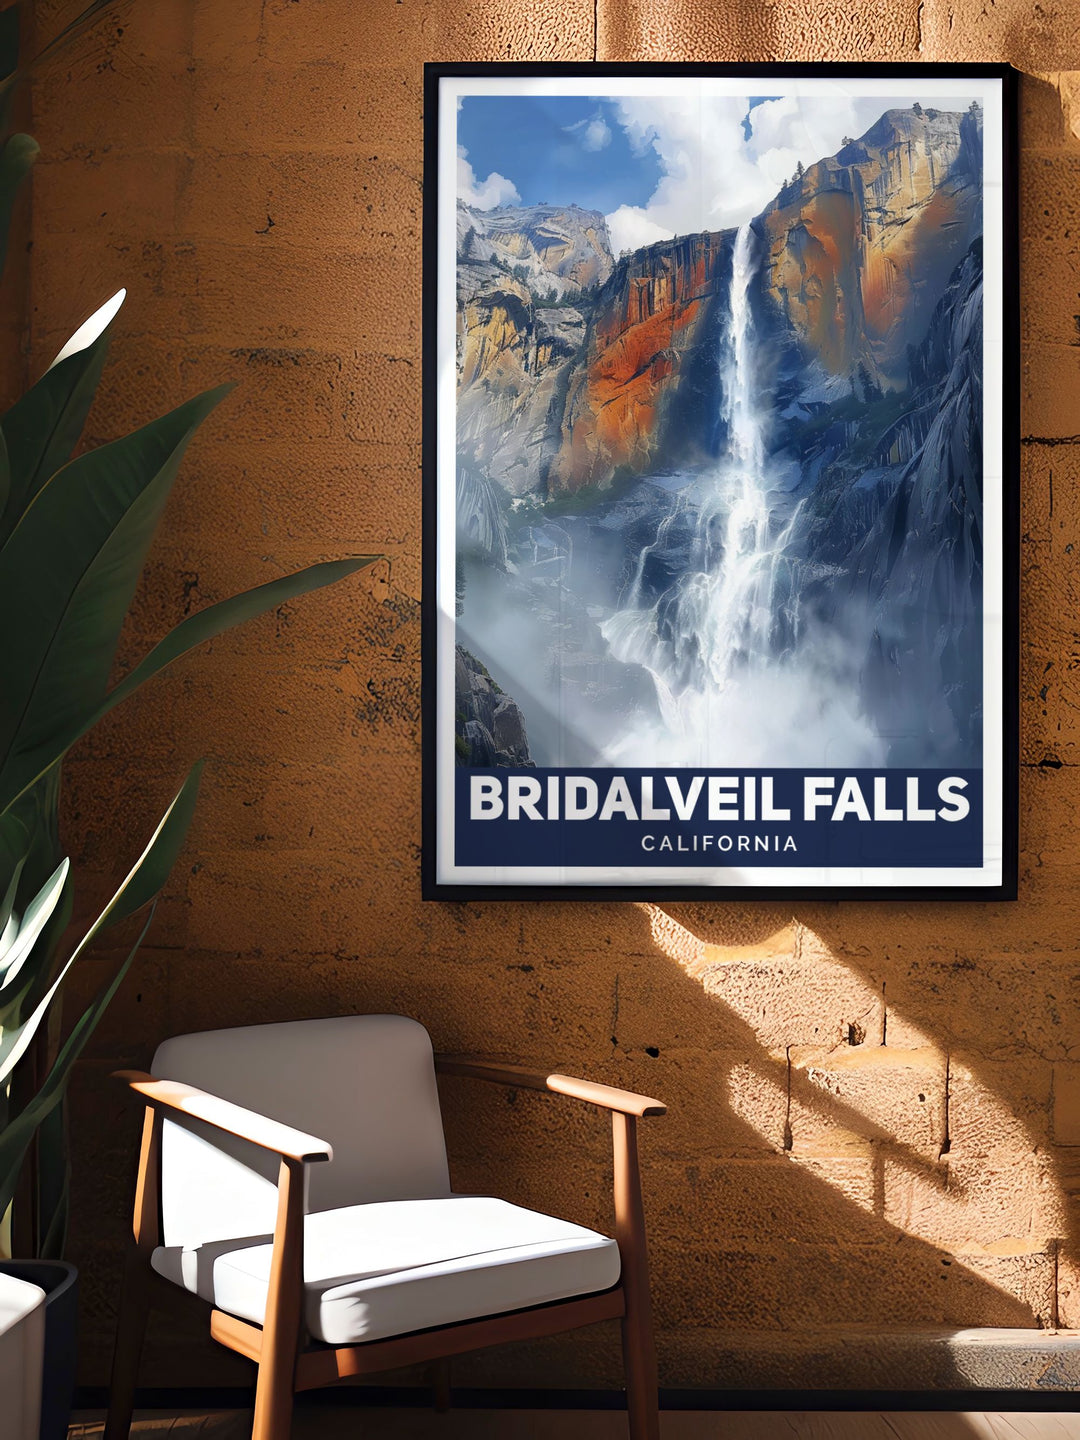 Closeup art of Bridalveil Falls in California featuring detailed imagery of the waterfall and surrounding landscape. This California travel print is a wonderful addition to any home decor and makes a great gift for nature enthusiasts and art collectors alike.